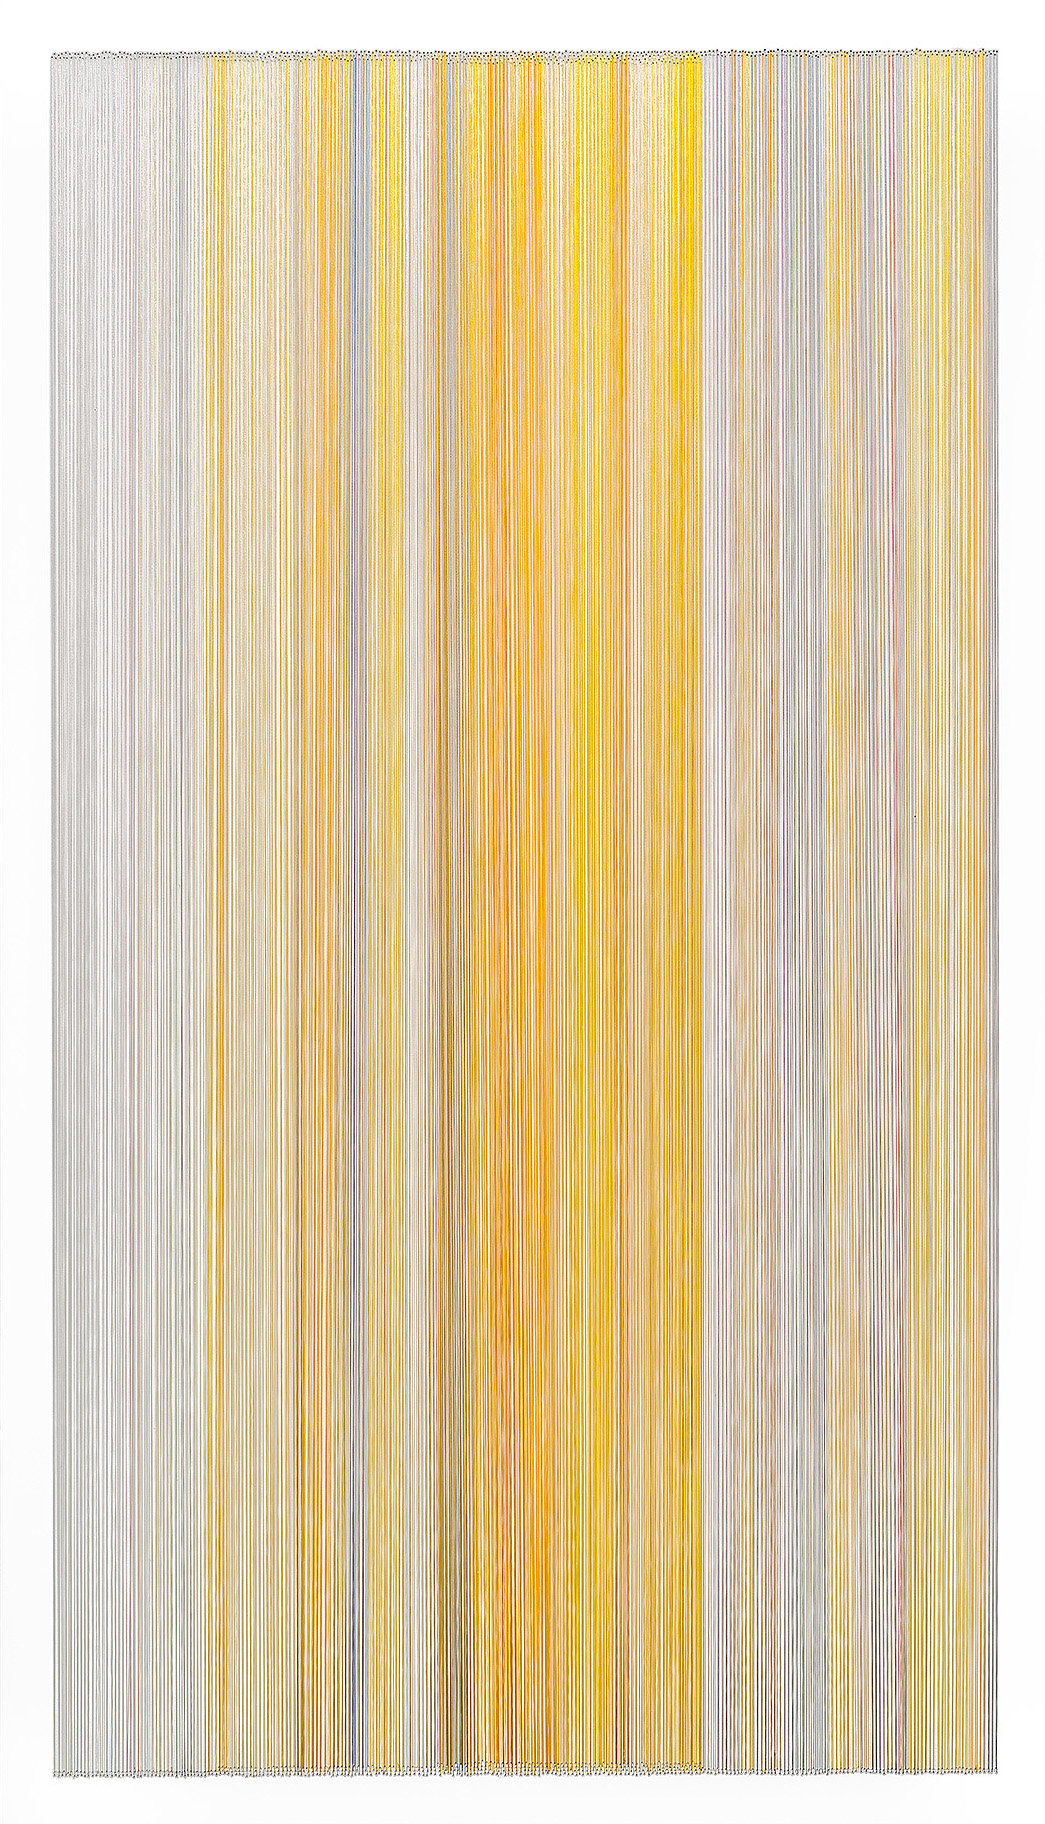    thread drawing 30   2014 rayon thread 42 x 24 inches Collection Stinson Law Firm, Kansas City, Missouri 